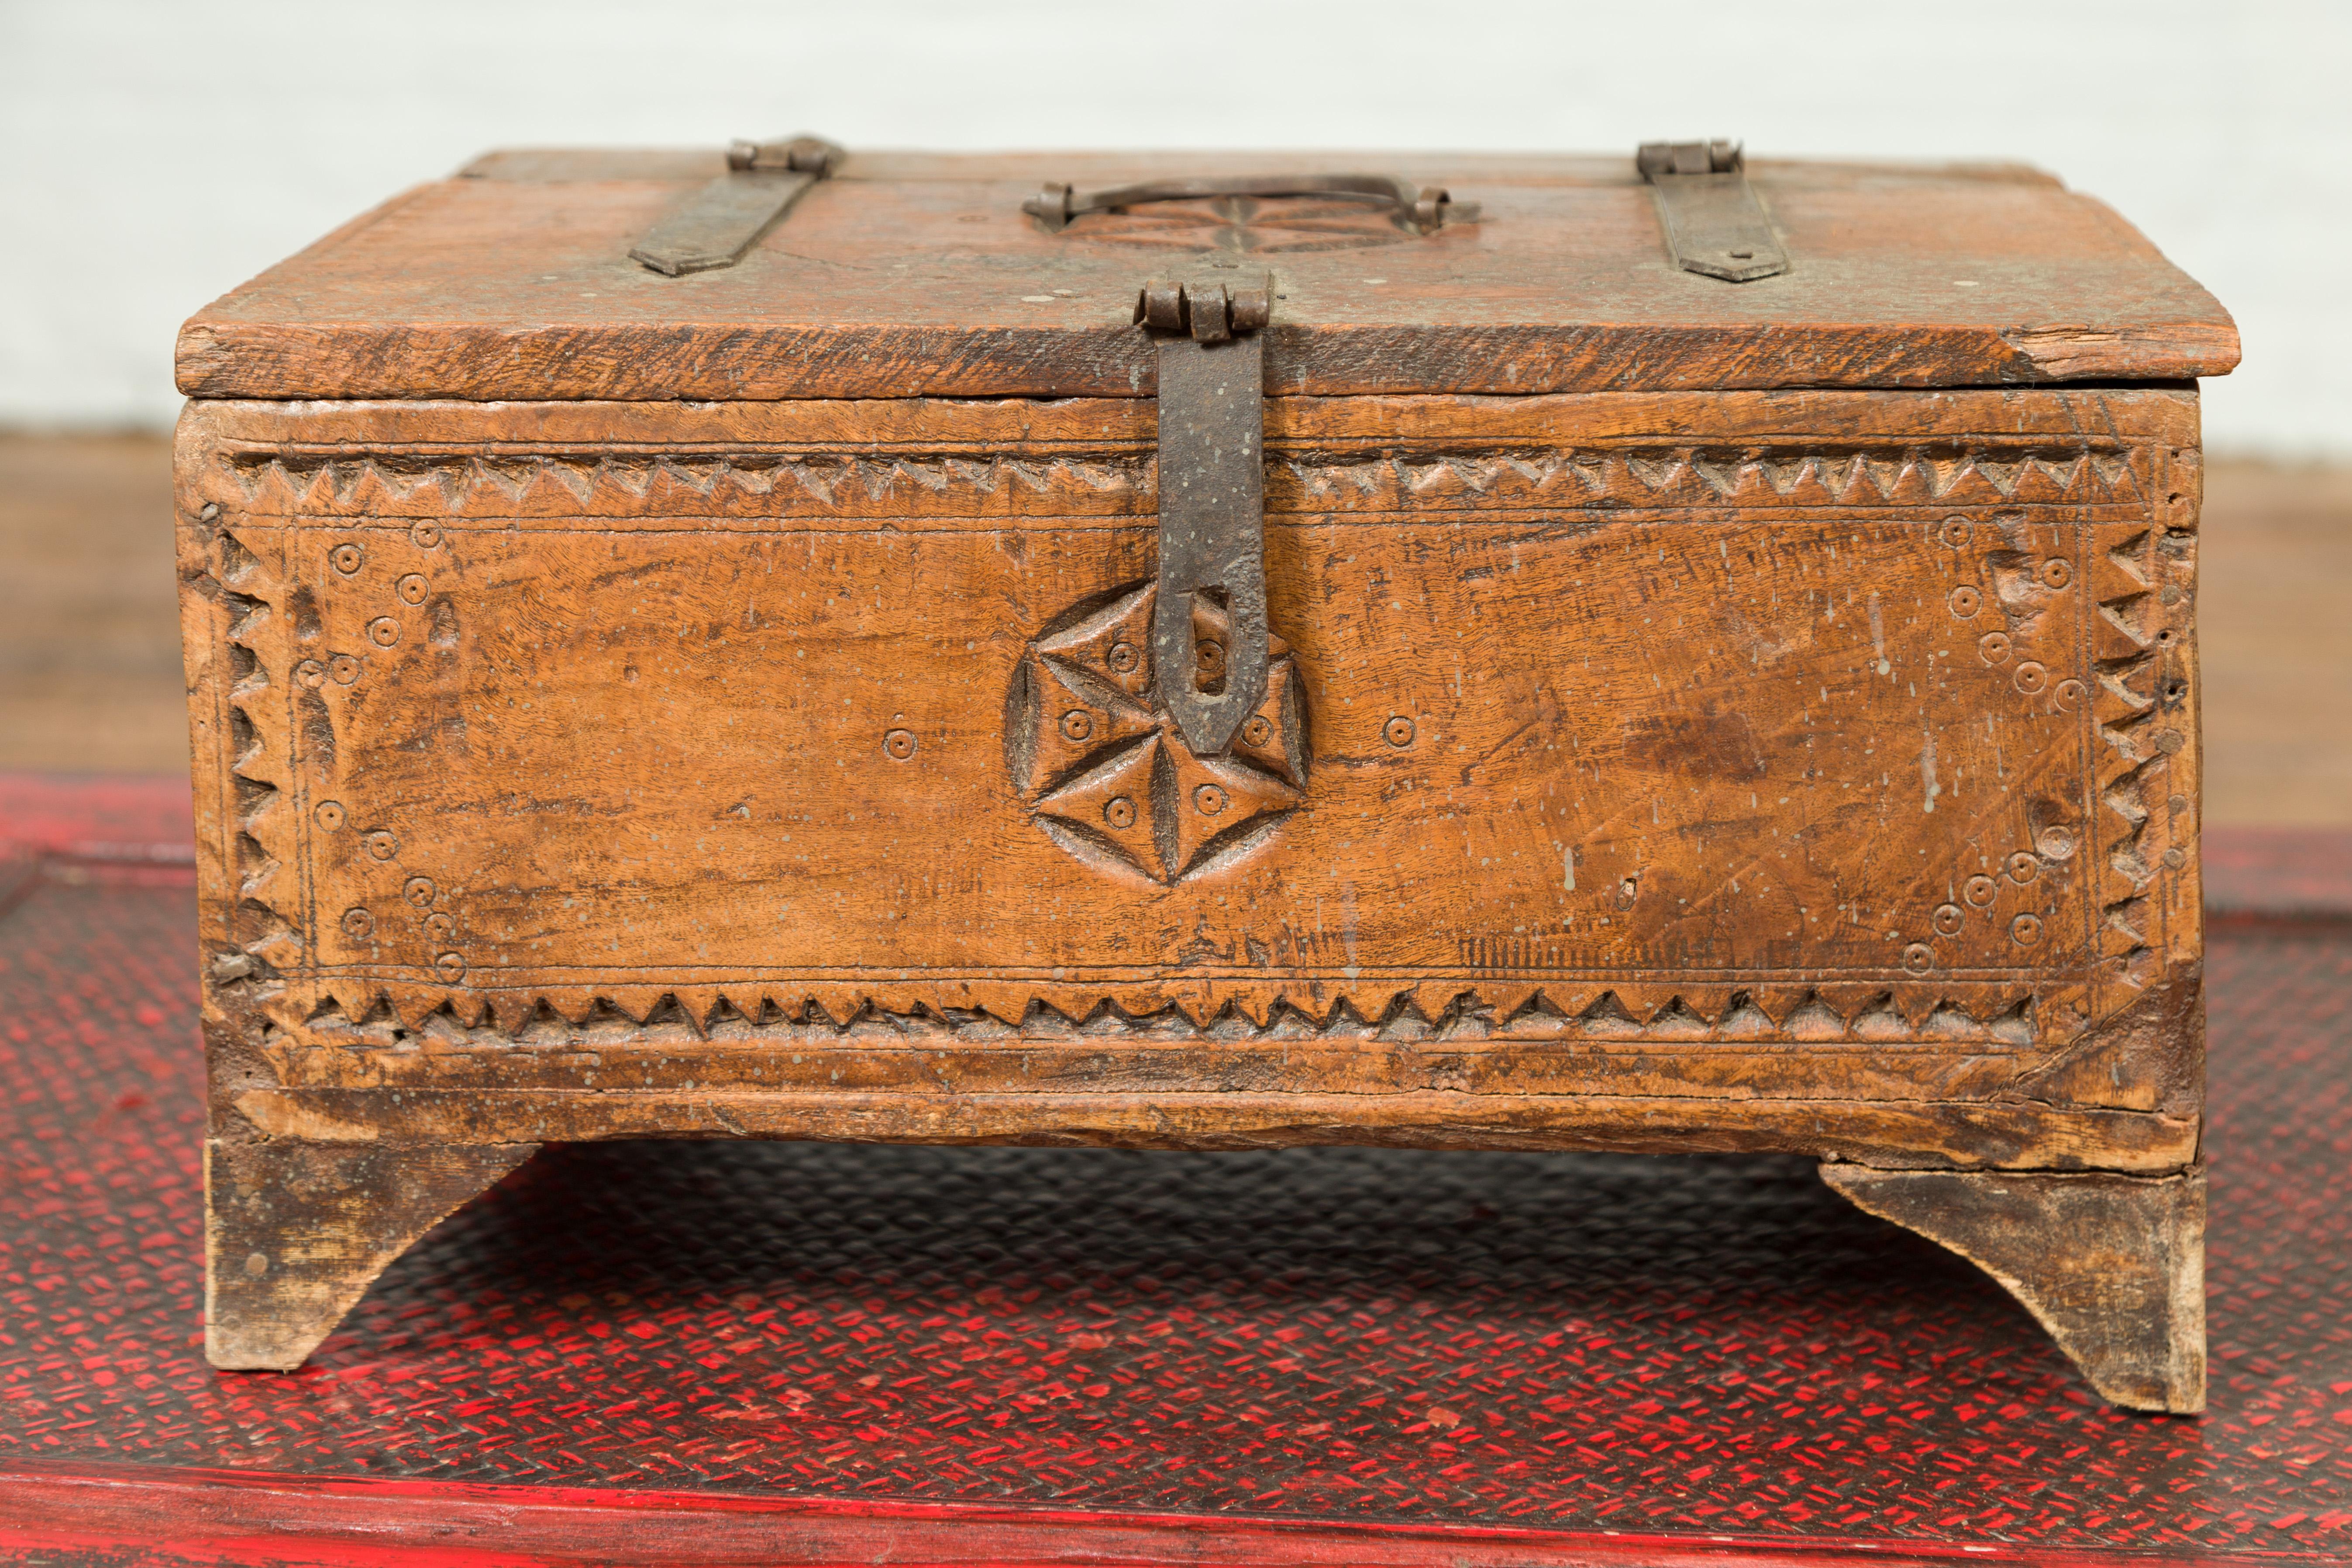 19th Century Antique Indian Carved Wooden Box with Rosettes and Geometric Patterns